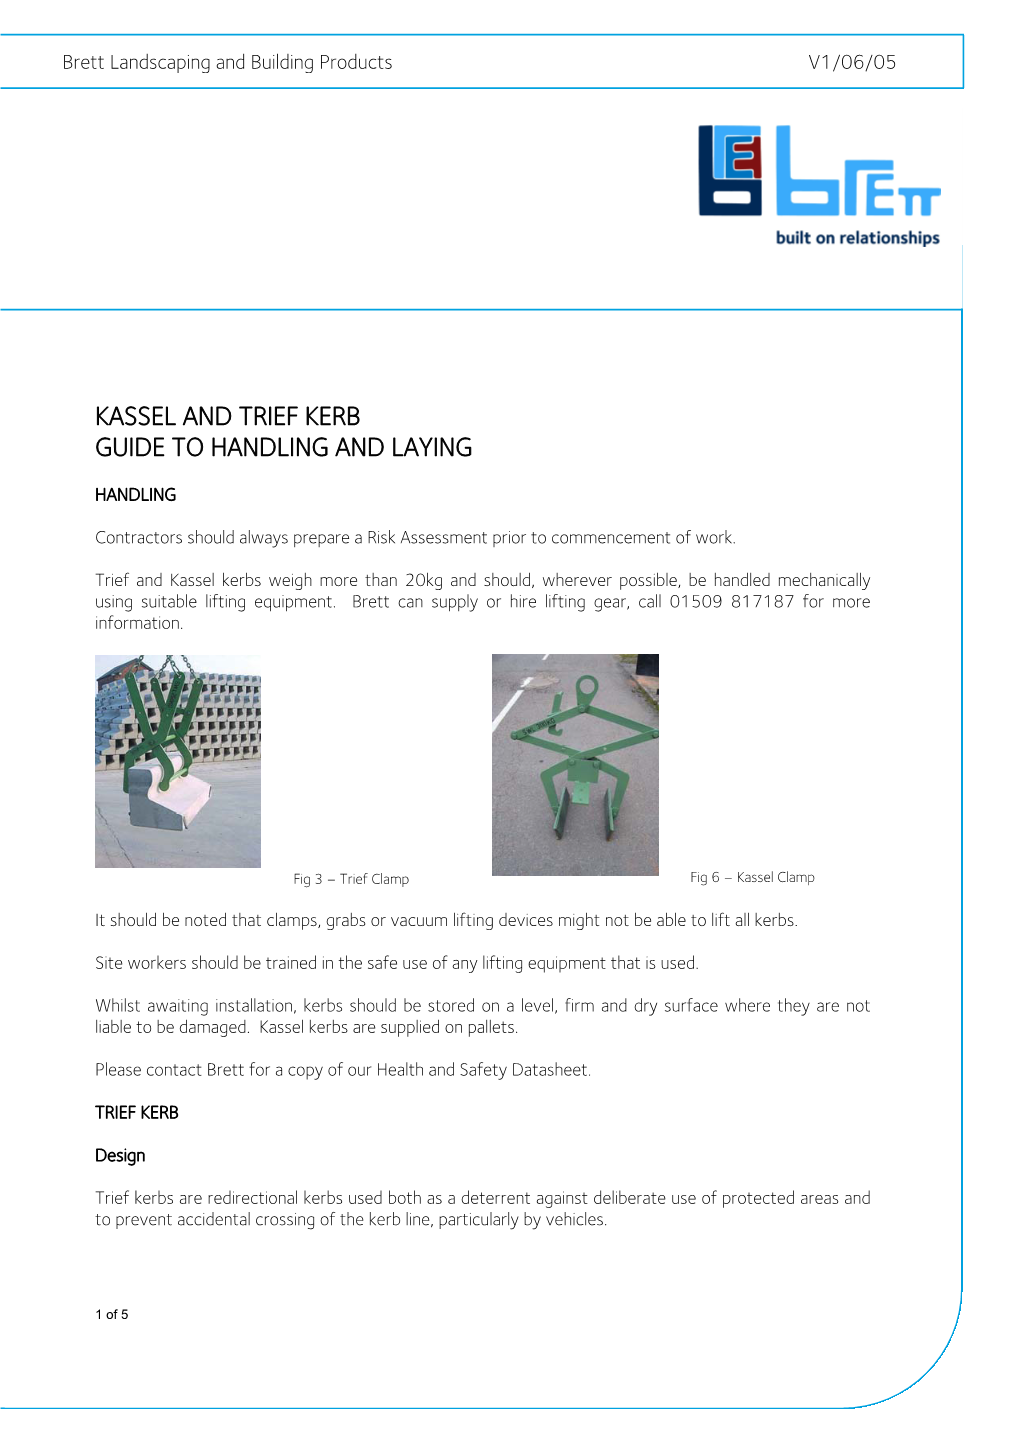 Kassel and Trief Kerb Guide to Handling and Laying